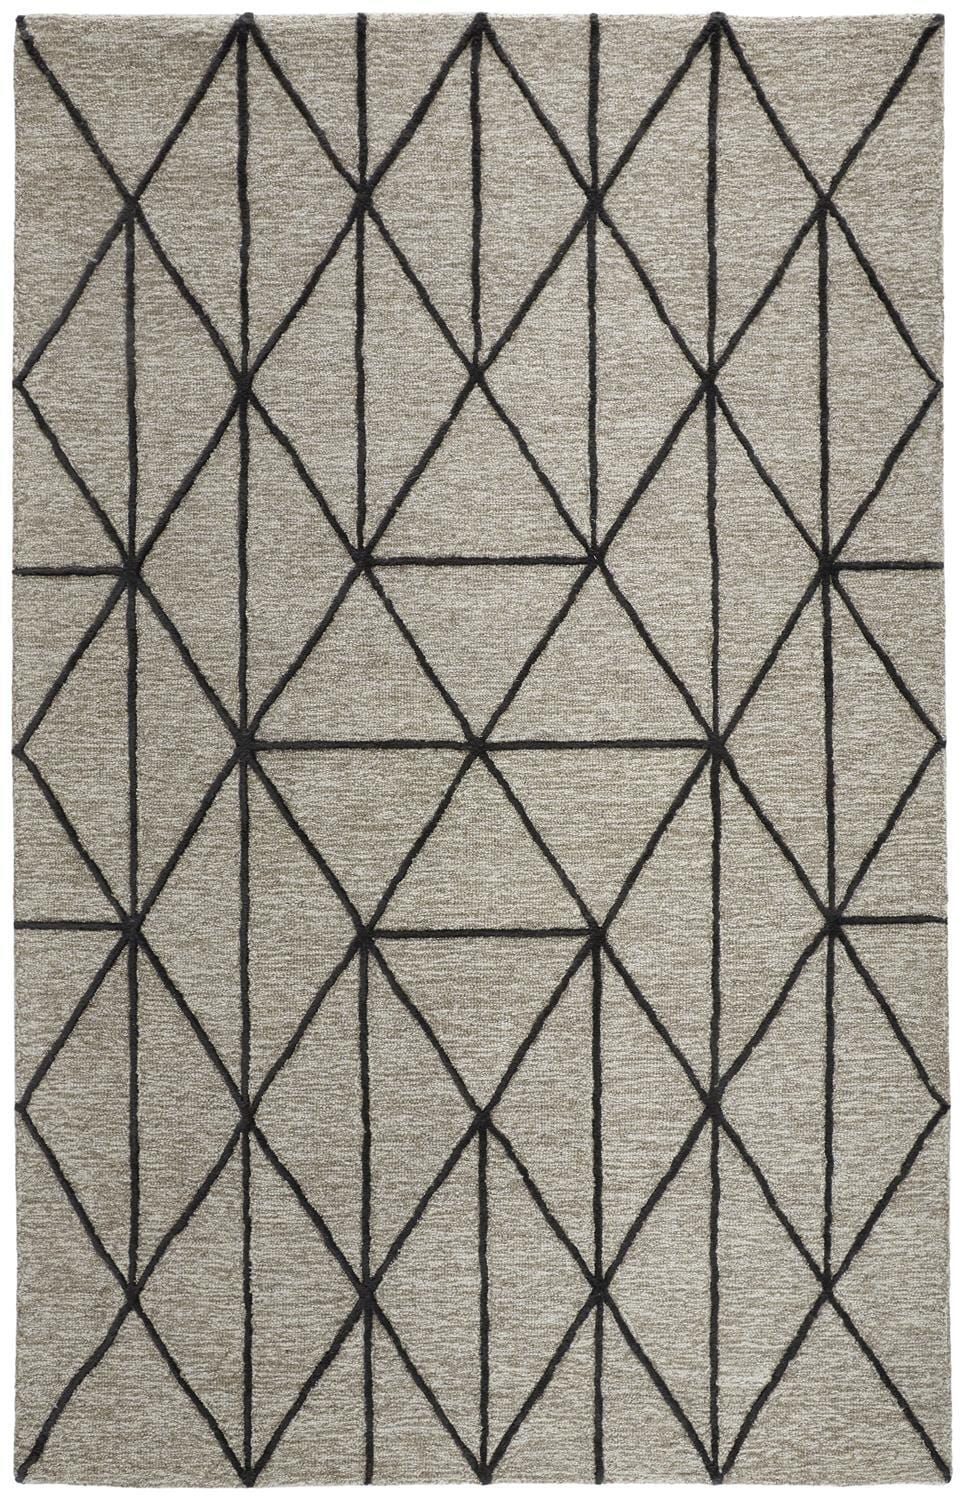 Feizy Feizy Lusk Contemporary Organic Wool Rug - Warm & Charcoal Gray - Available in 4 Sizes